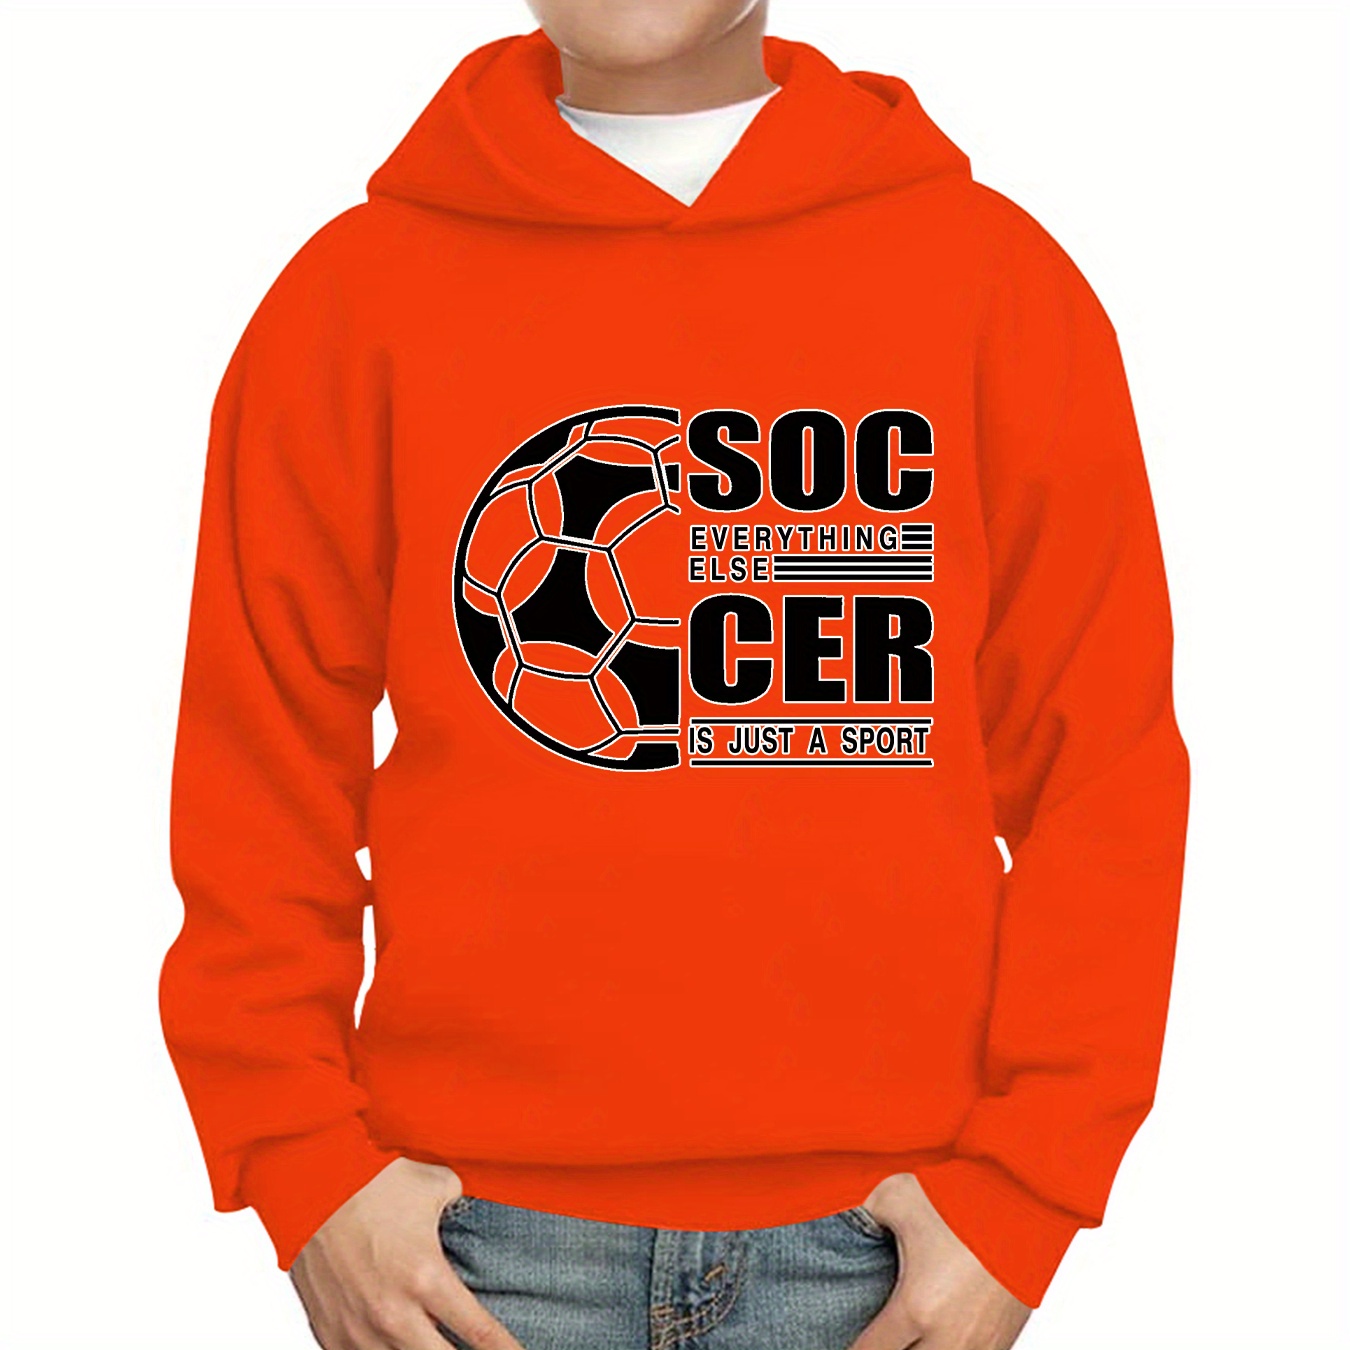 

Soccer Print Hoodies For Boys - Casual Graphic Design With Stretch Fabric For Comfortable Autumn/winter Wear